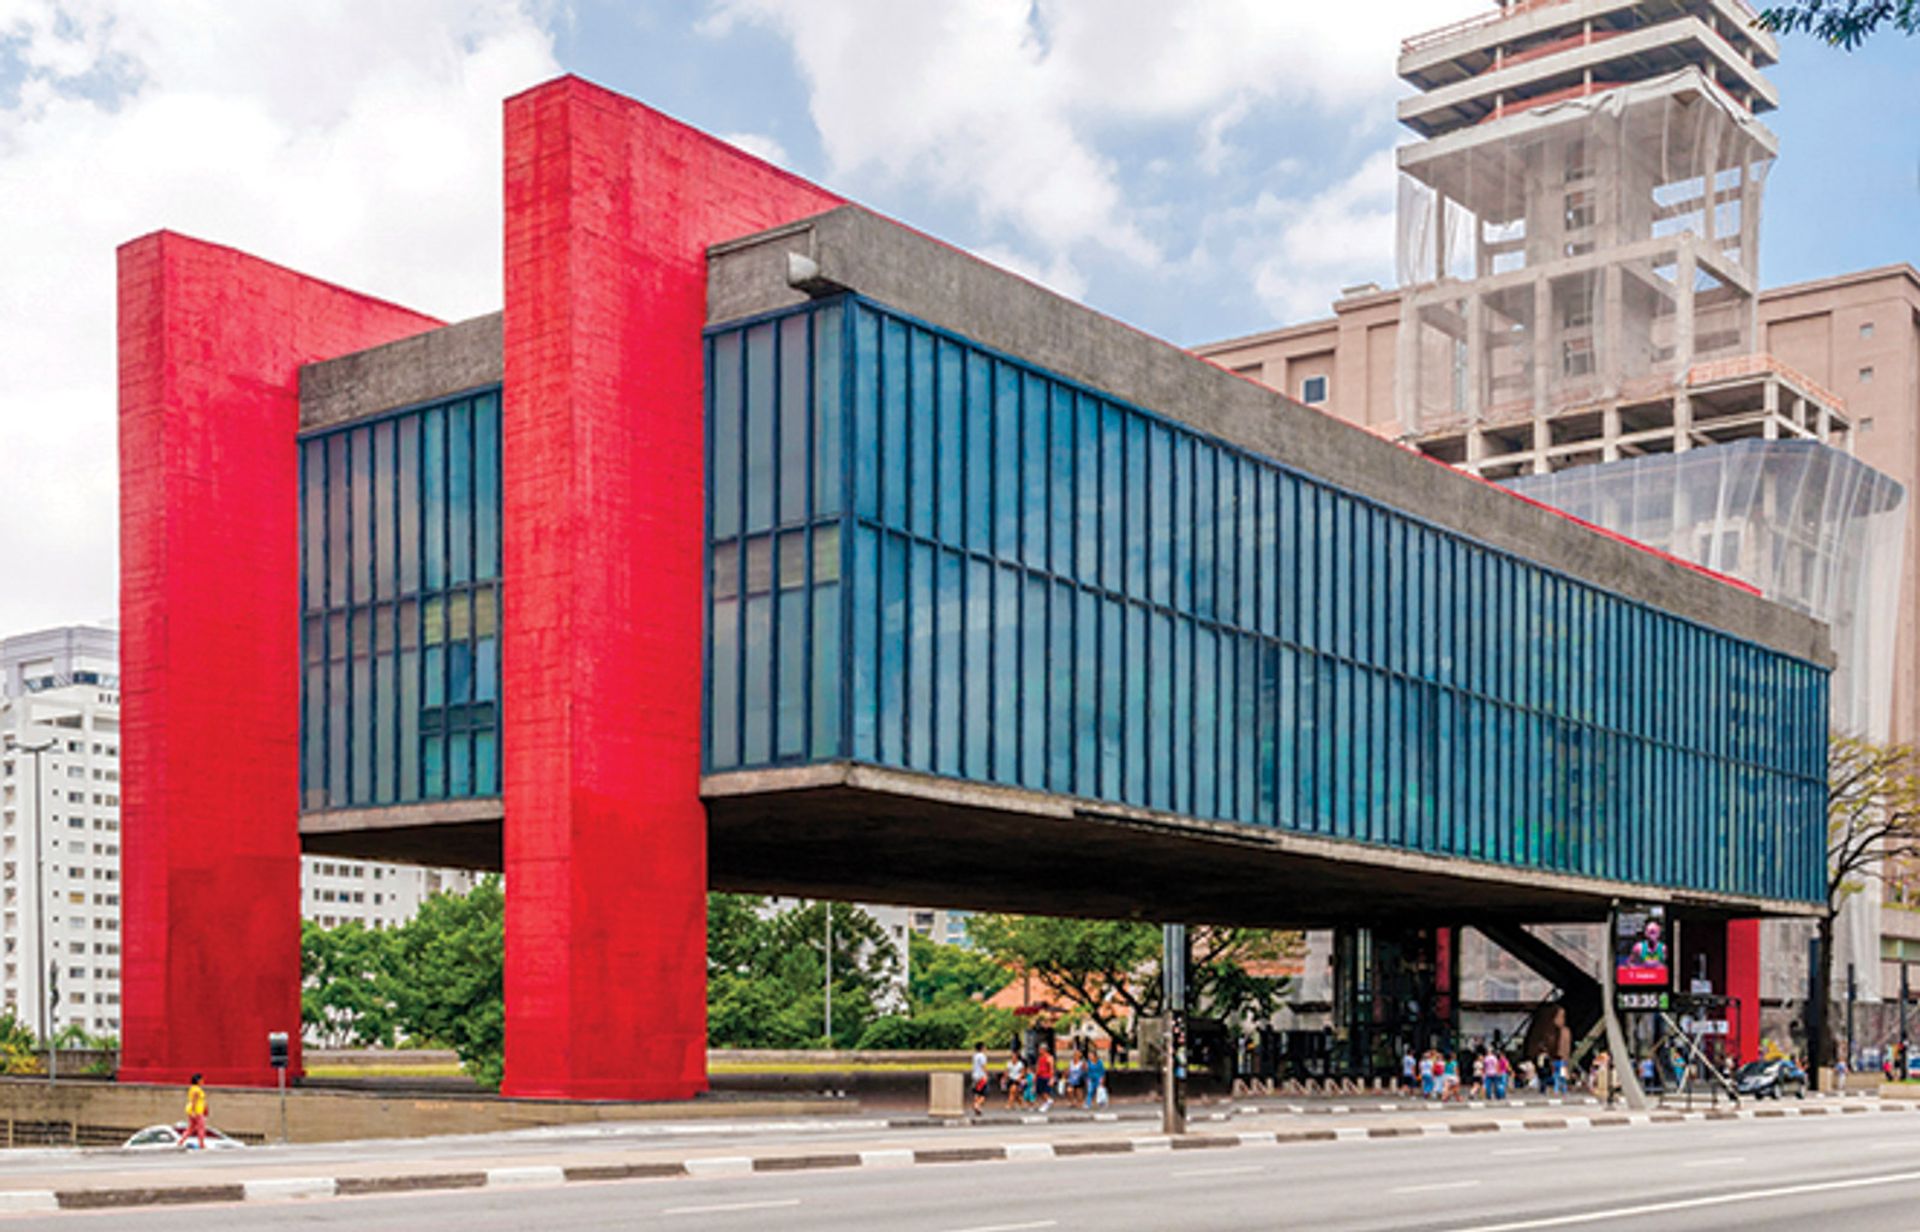 São Paulo's Museum of Art of São Paulo Assis Chateaubriand will not be impacted by new changes to the Rouanet Law 